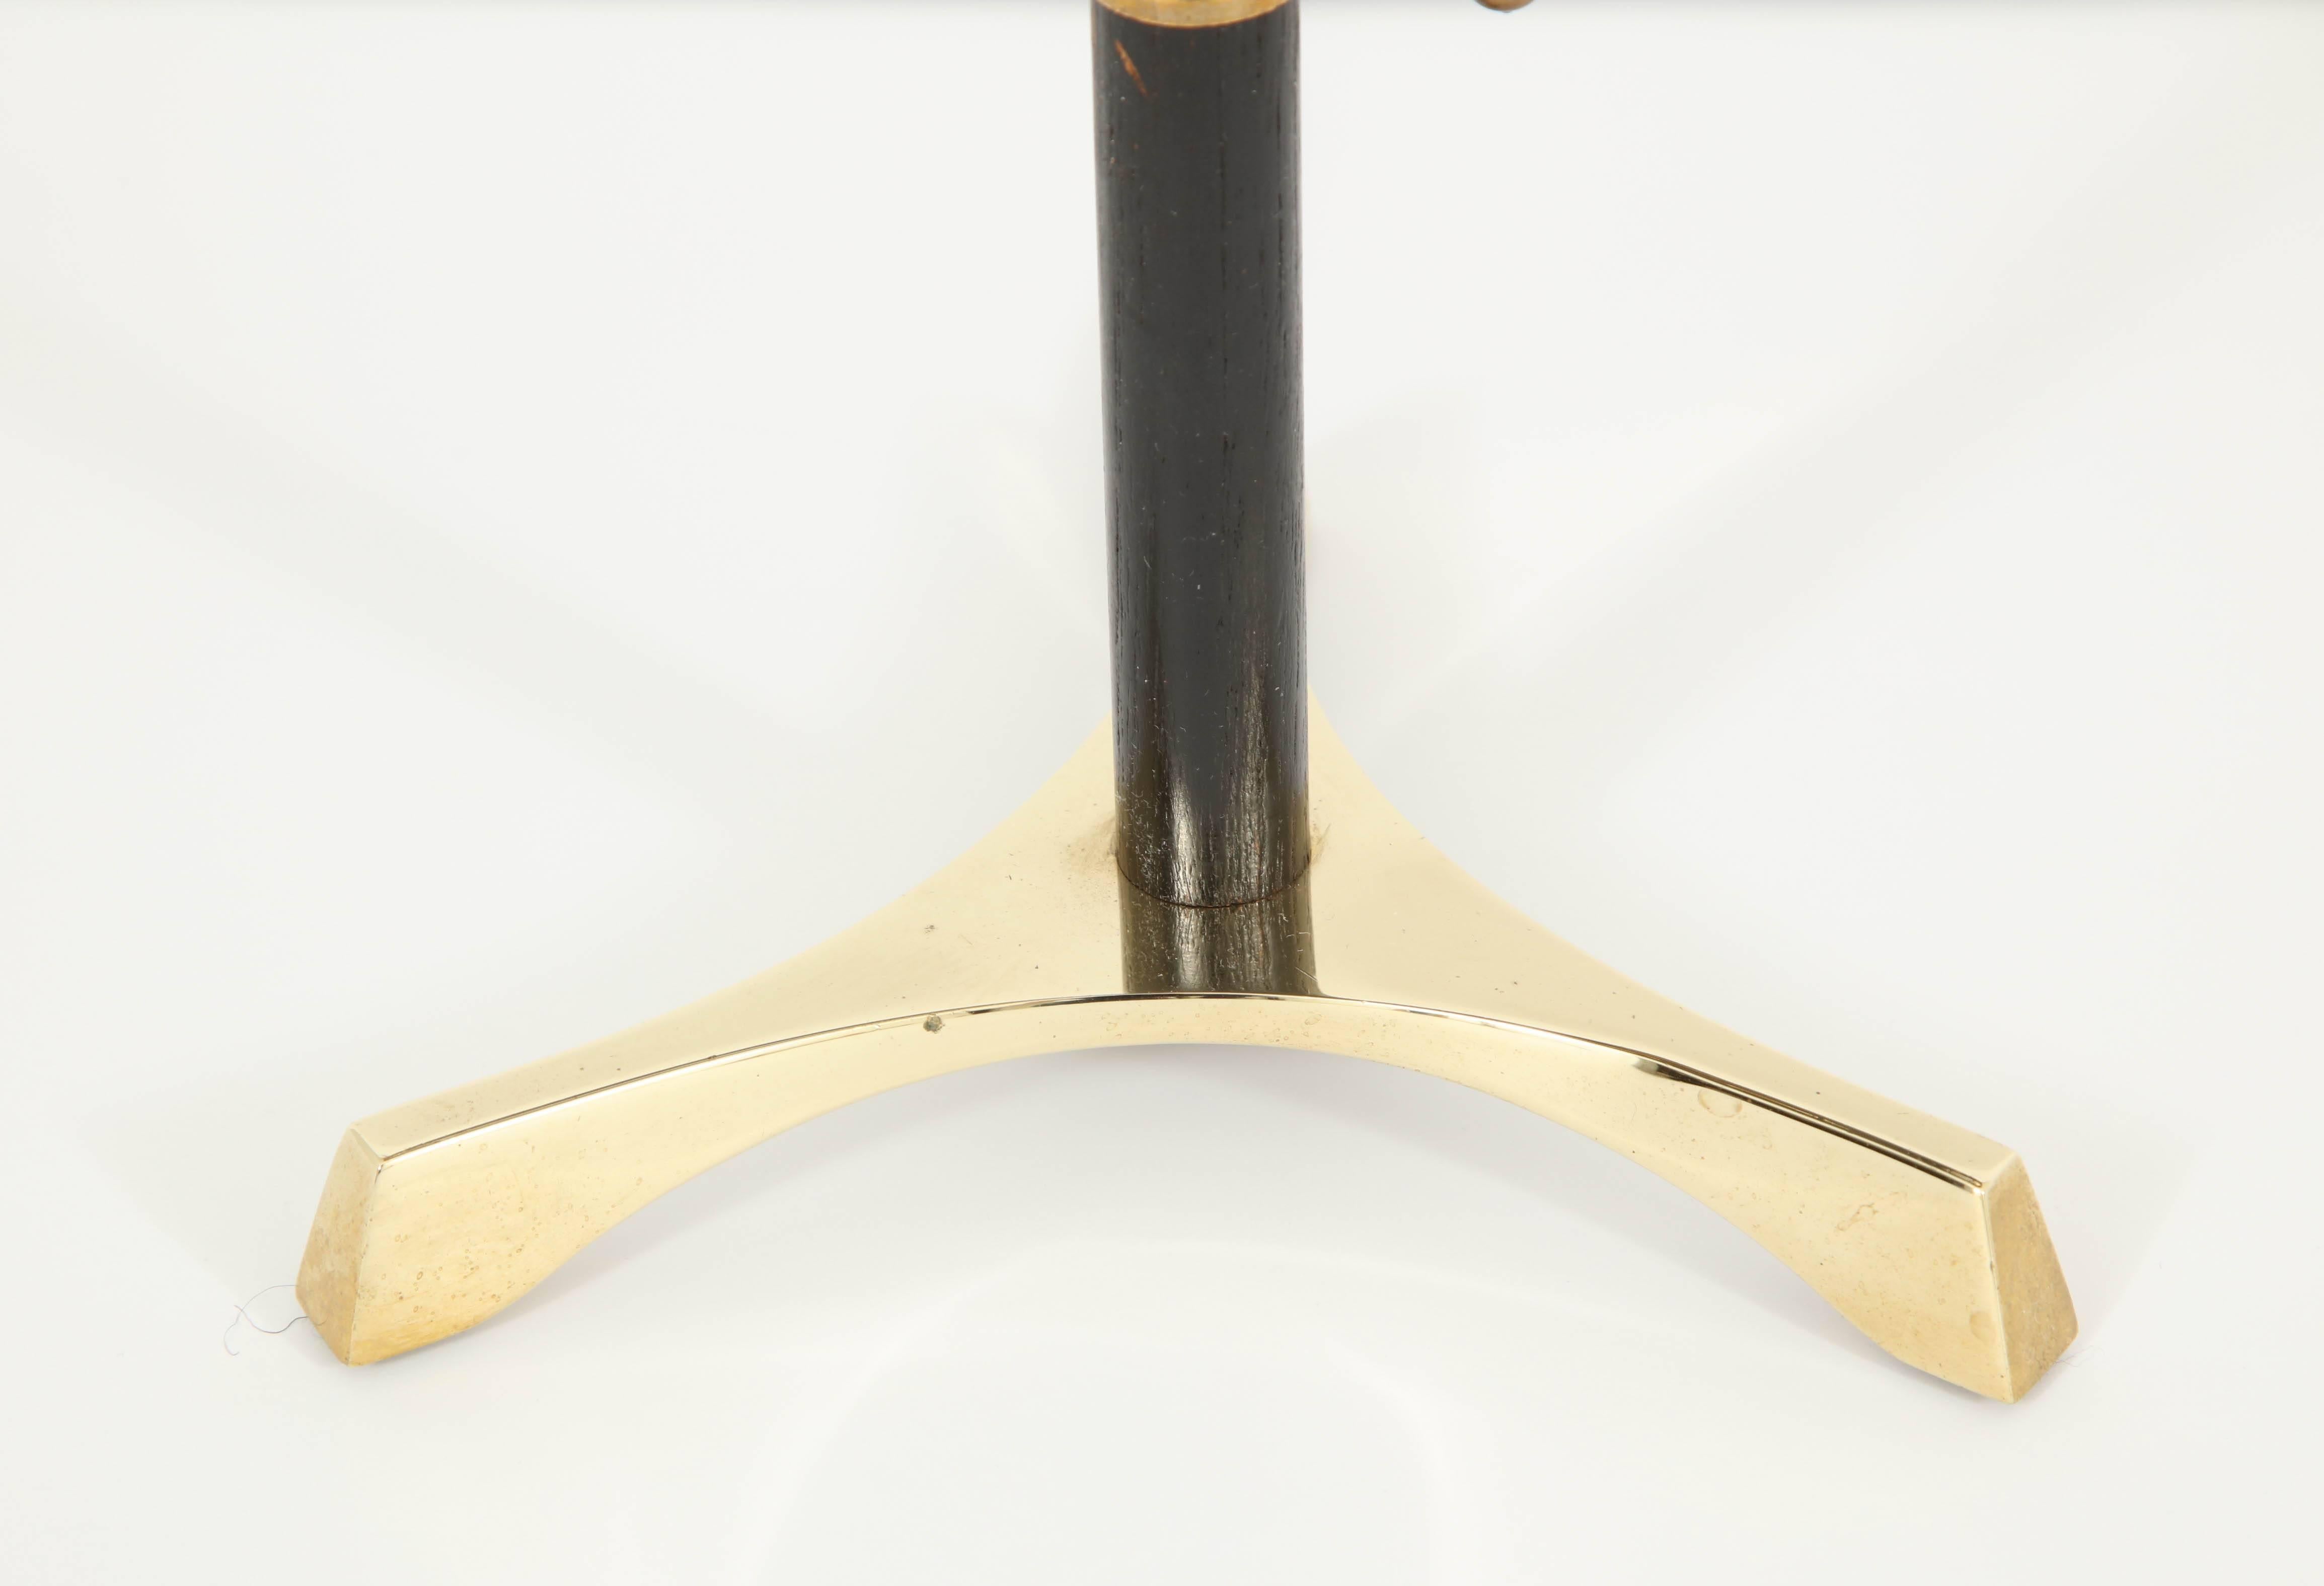 Hand-Crafted Brass Table Lamp with Black Wood Details, circa 1960